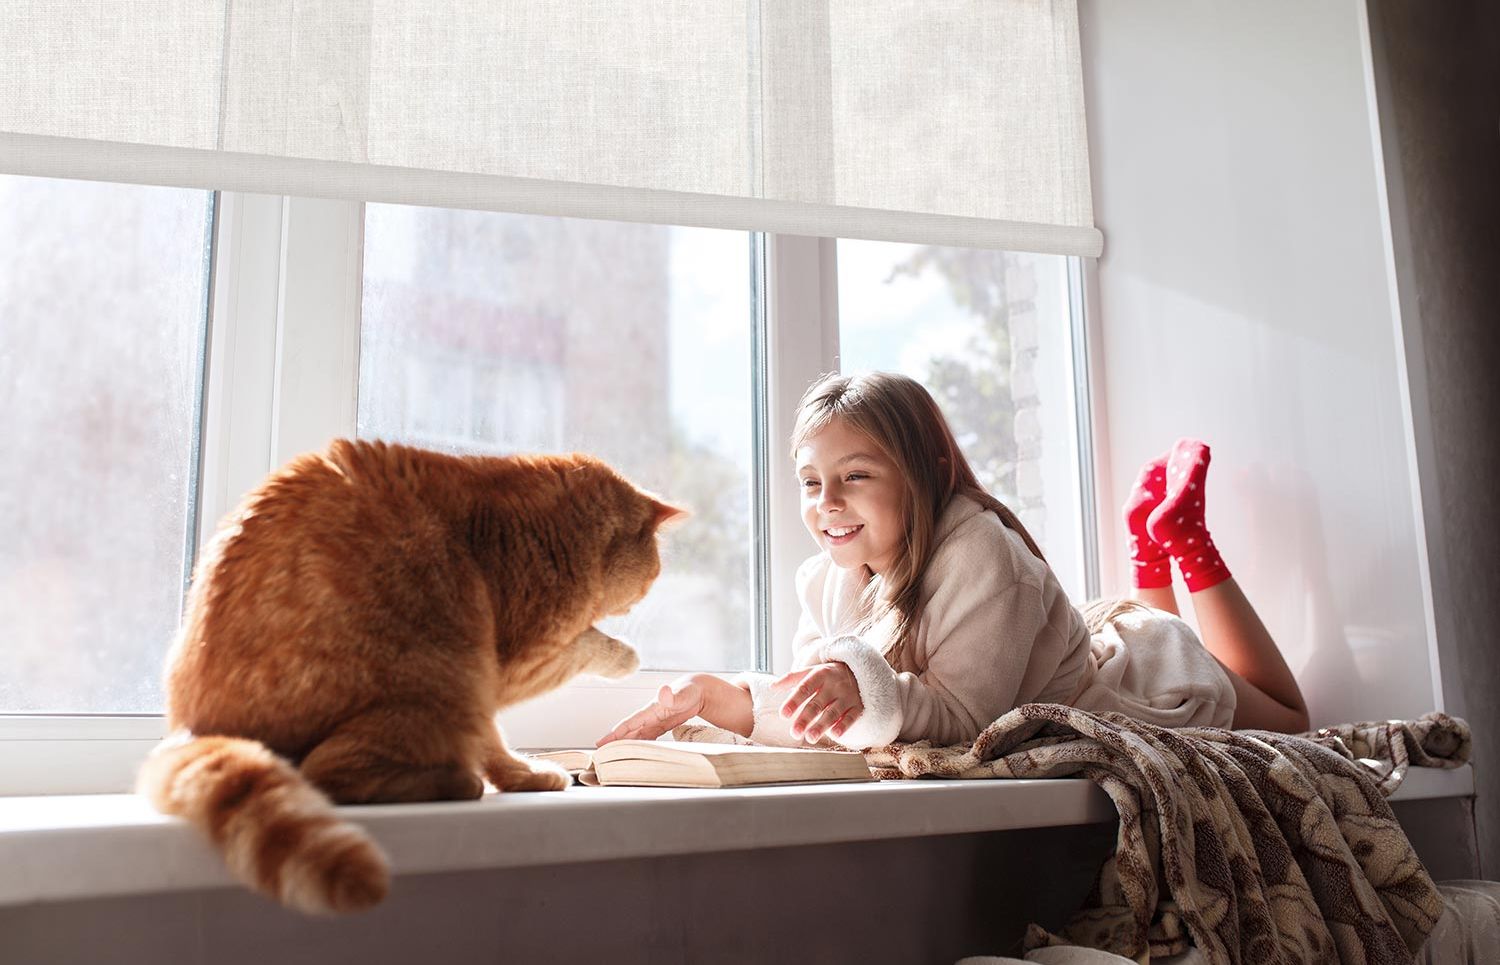 A young girl lies on a windowsill, smiling and interacting with a large ginger cat. Sunlight streams through the window, highlighting the cozy, bright scene. The window is partially covered by a light-colored Crestron shade.